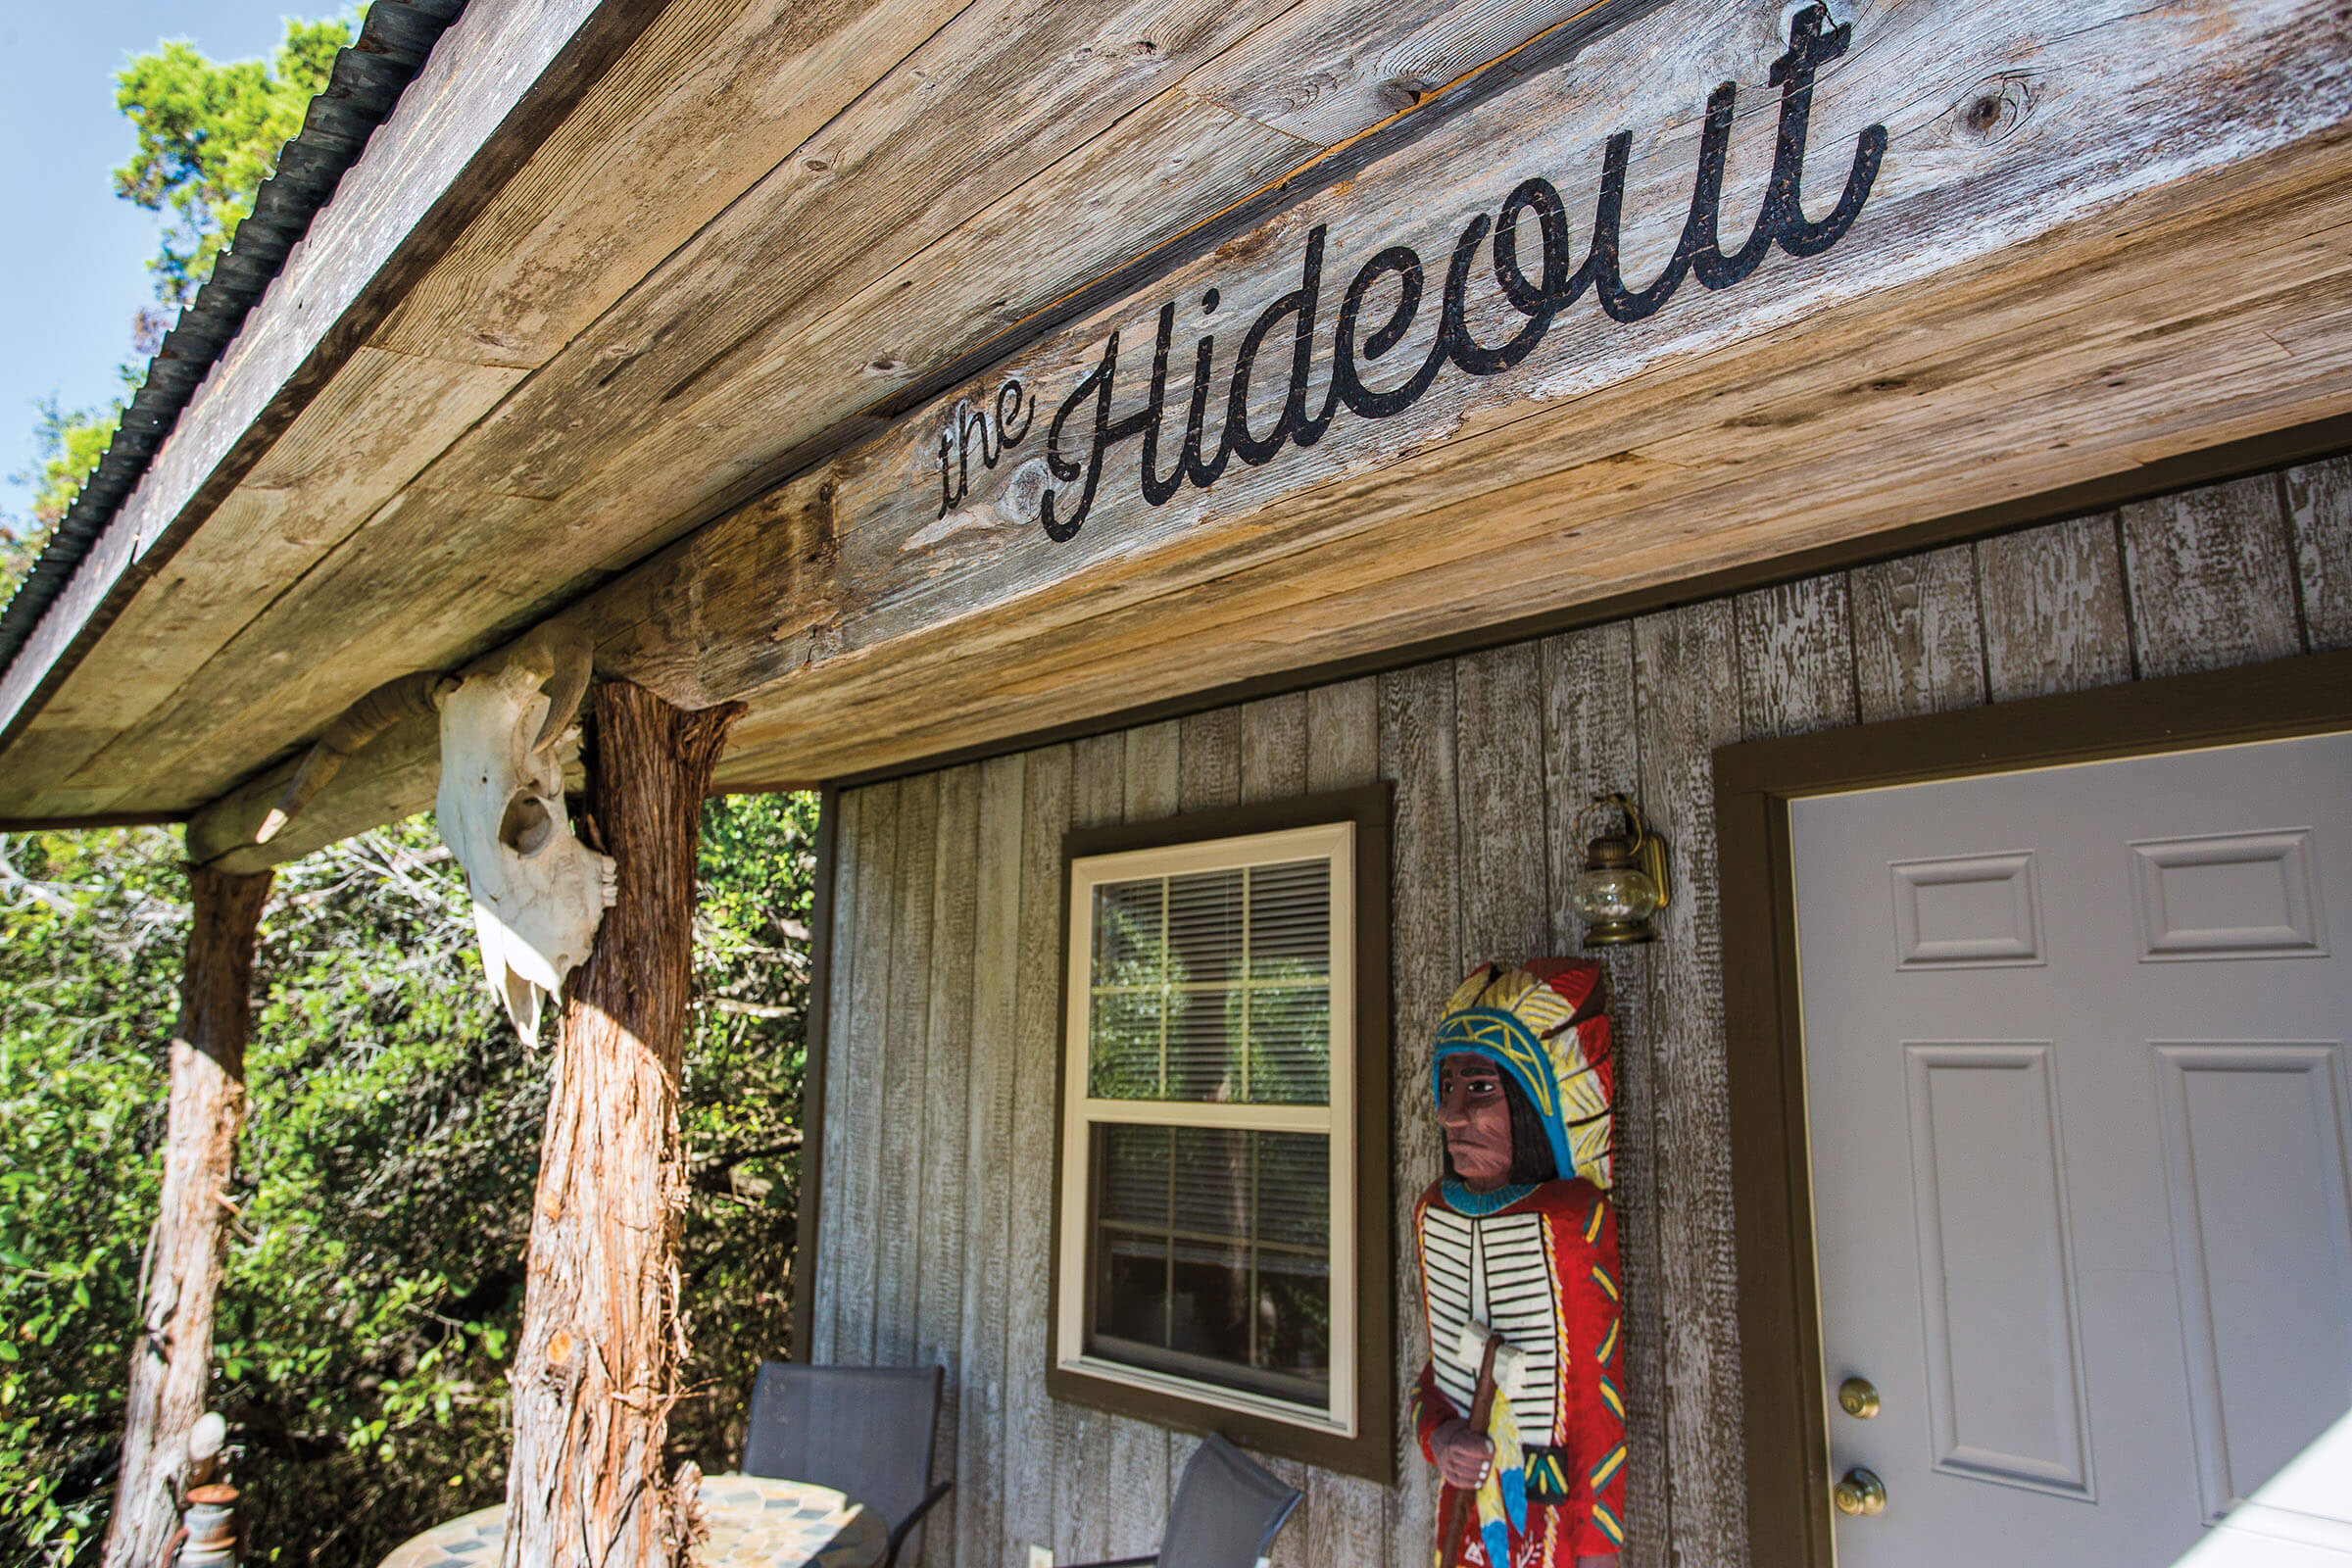 The outside of a wooden cabin reading "The Hideout"